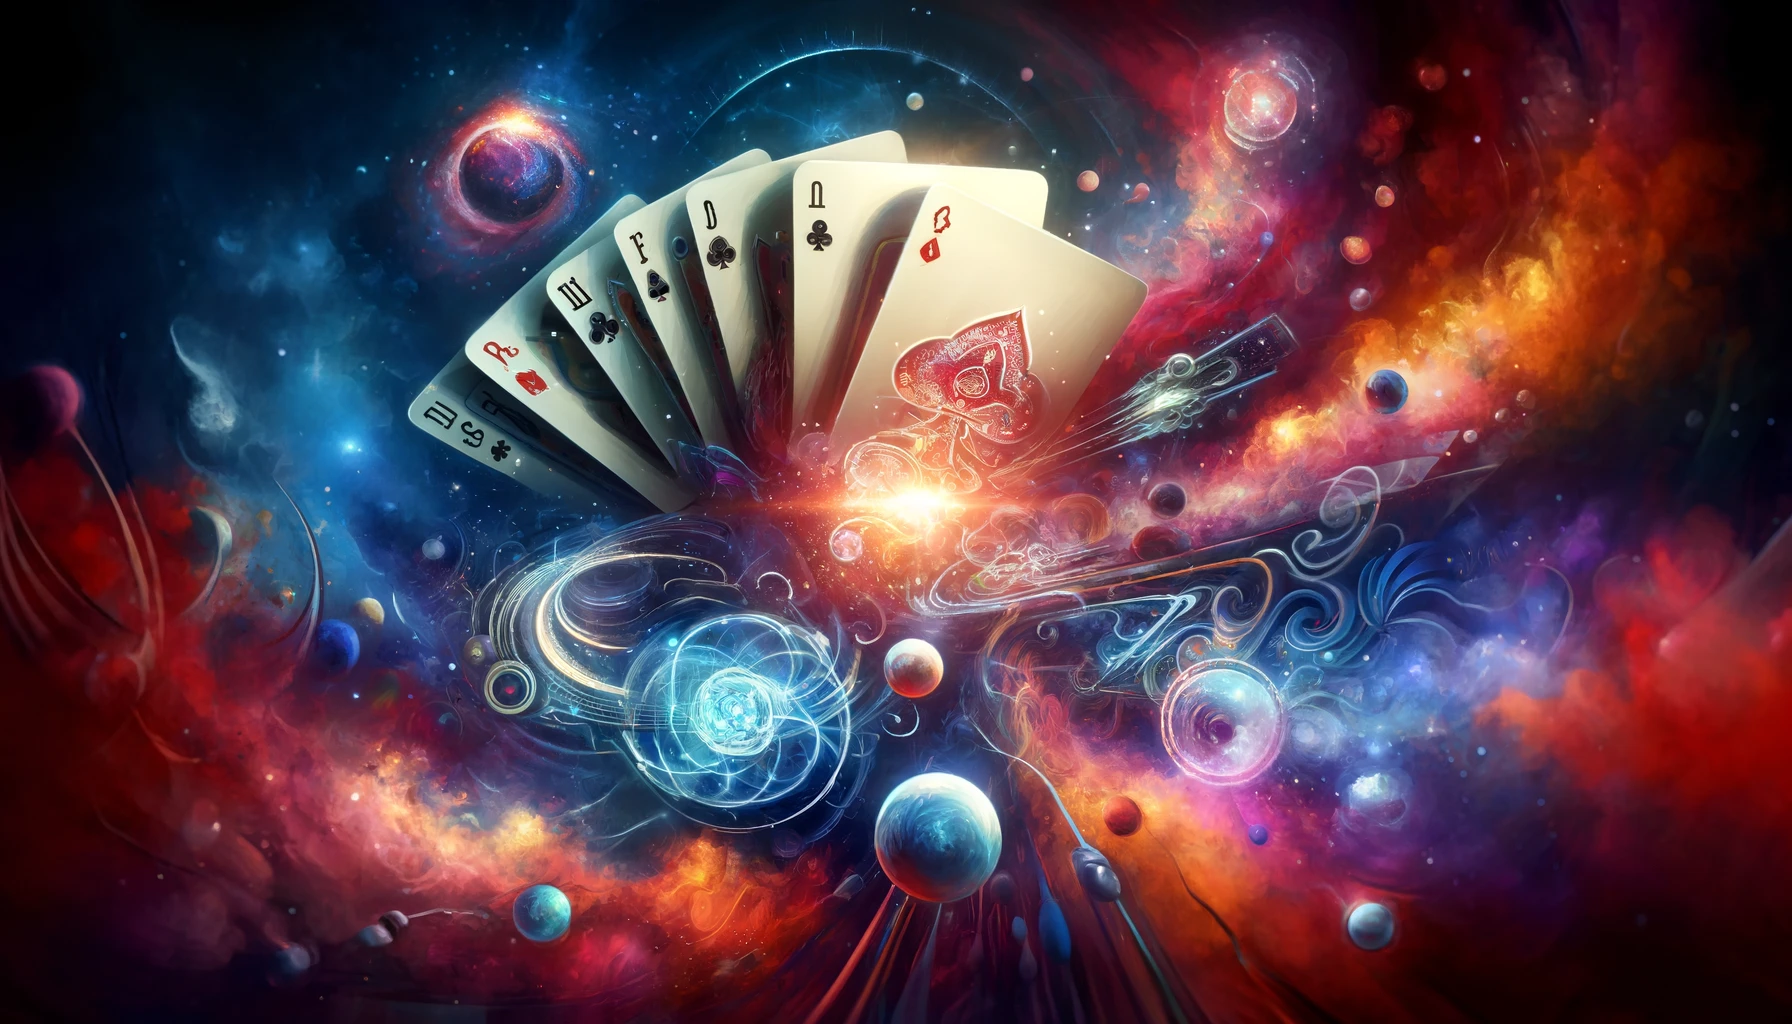 An ethereal and vibrant cosmic scene featuring playing cards suspended amidst swirling galaxies and colorful nebulae, symbolizing strategic gameplay in Marvel Snap.